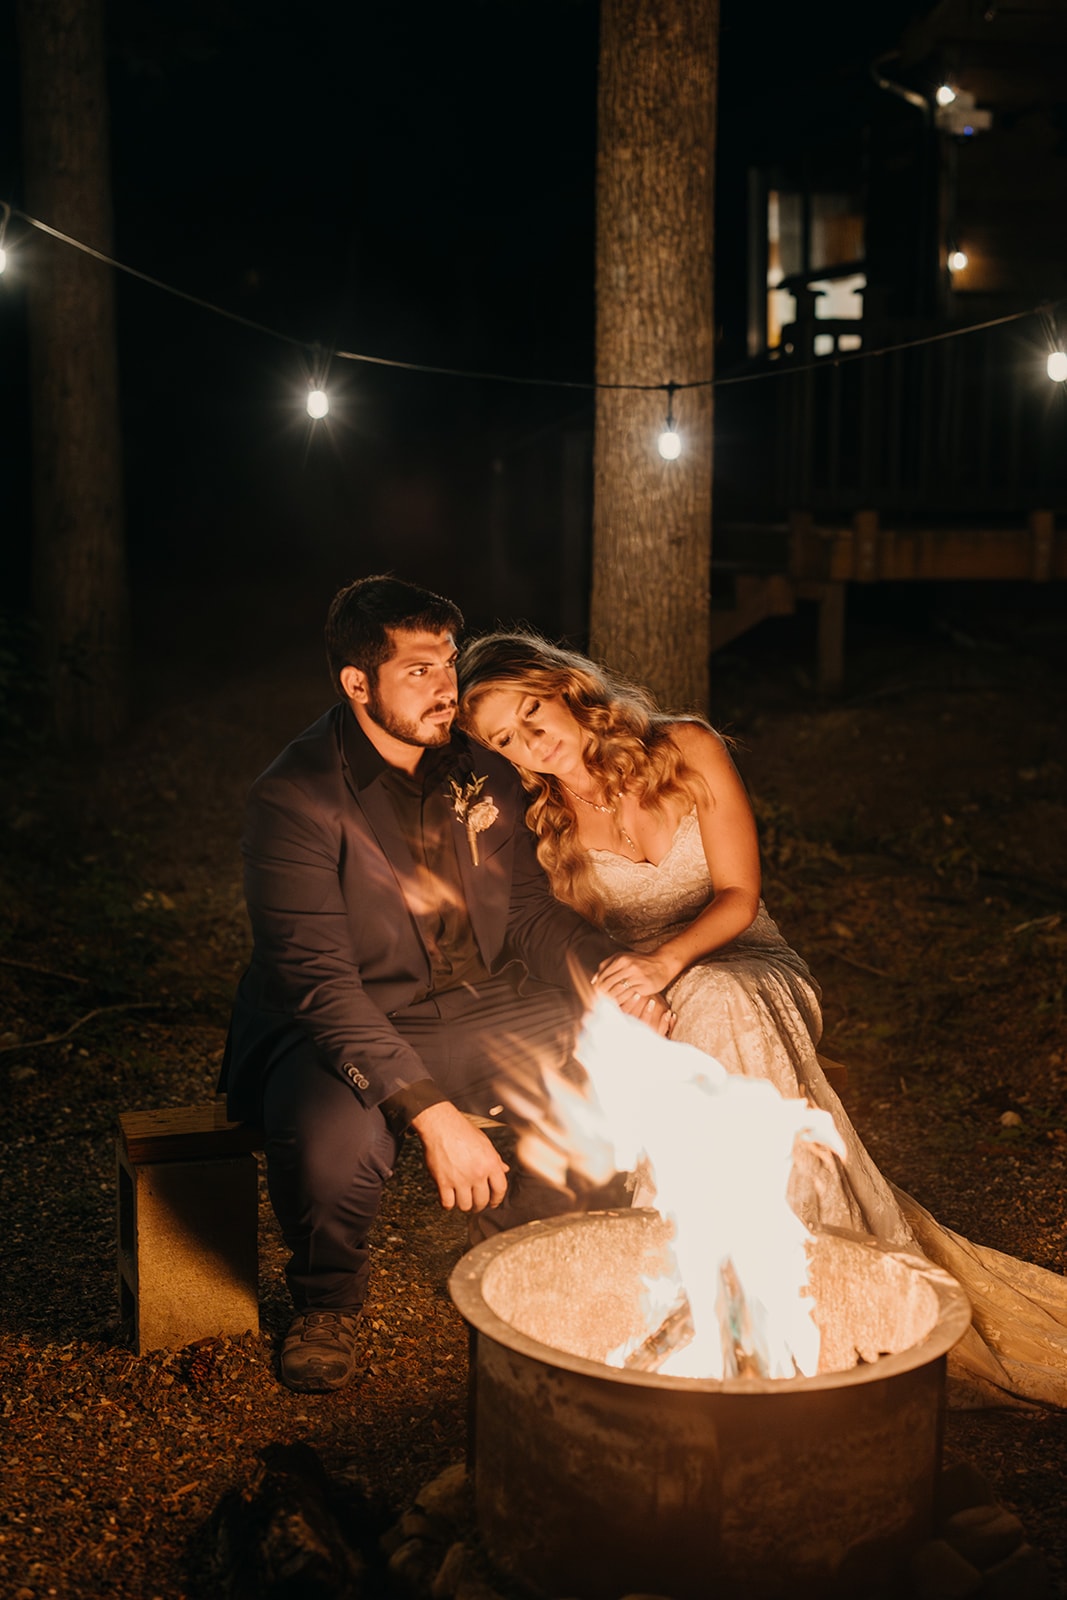 The couple sits by a fire together.